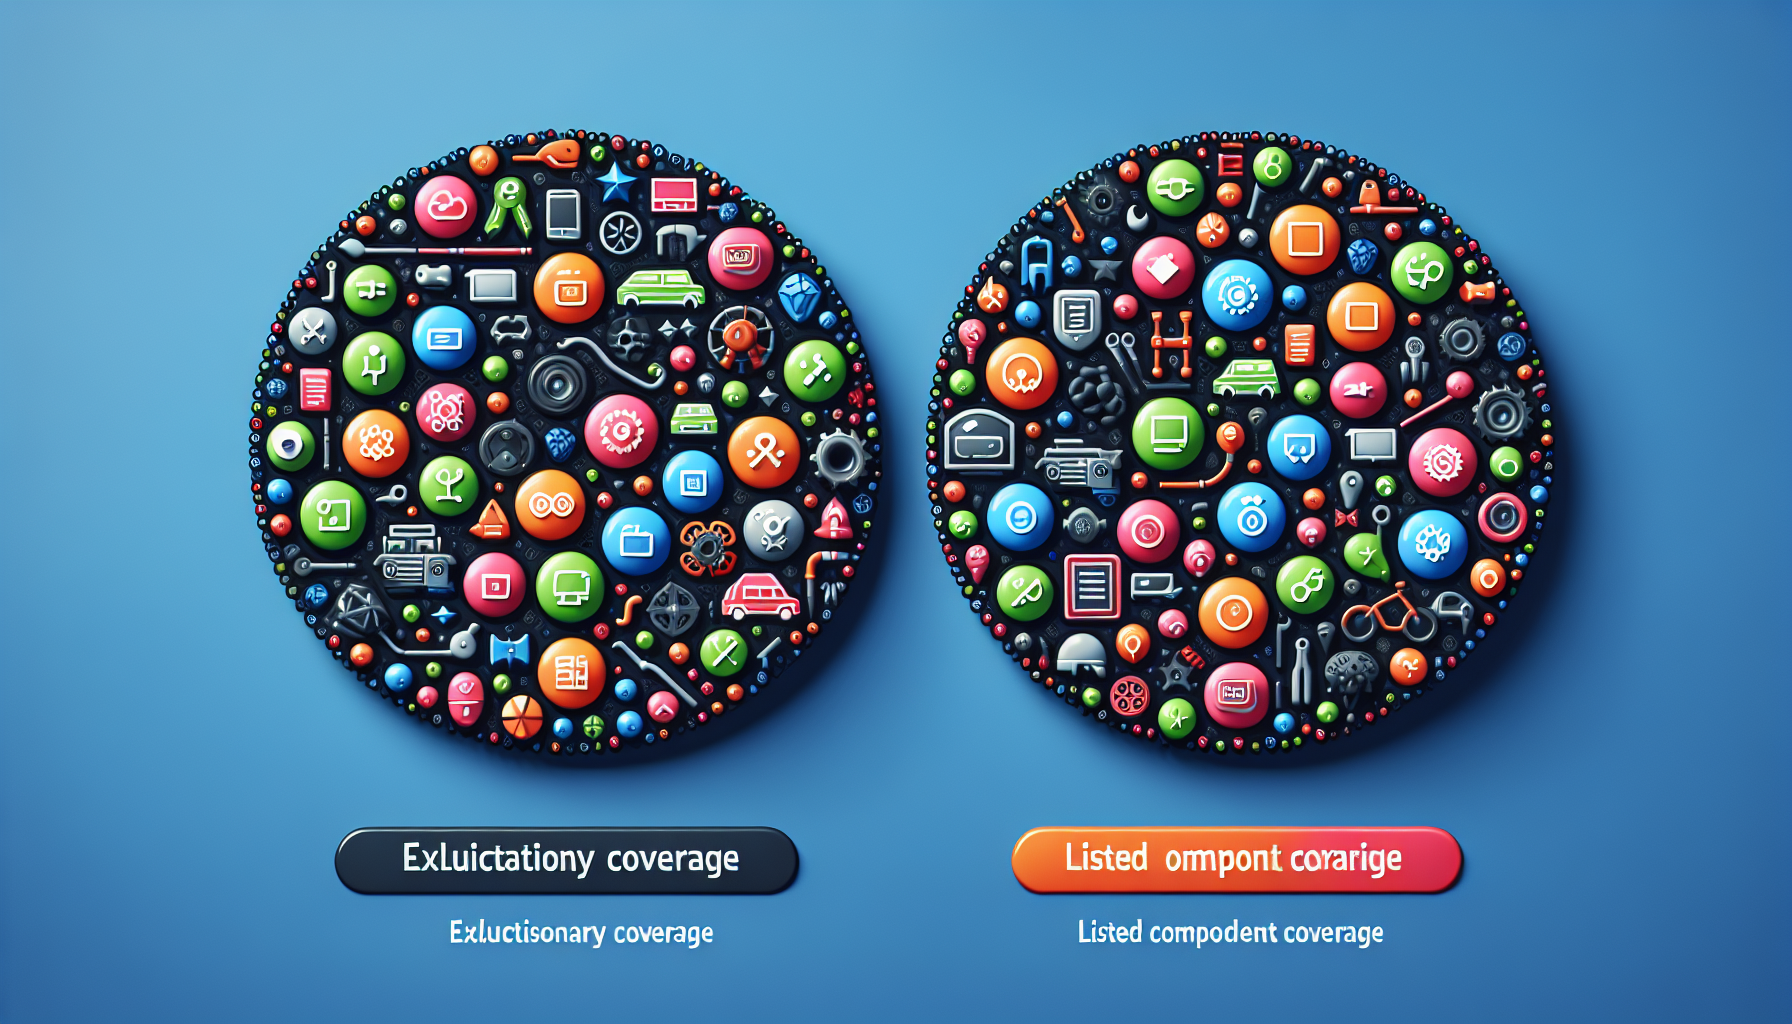 Comparison of exclusionary and listed component coverage